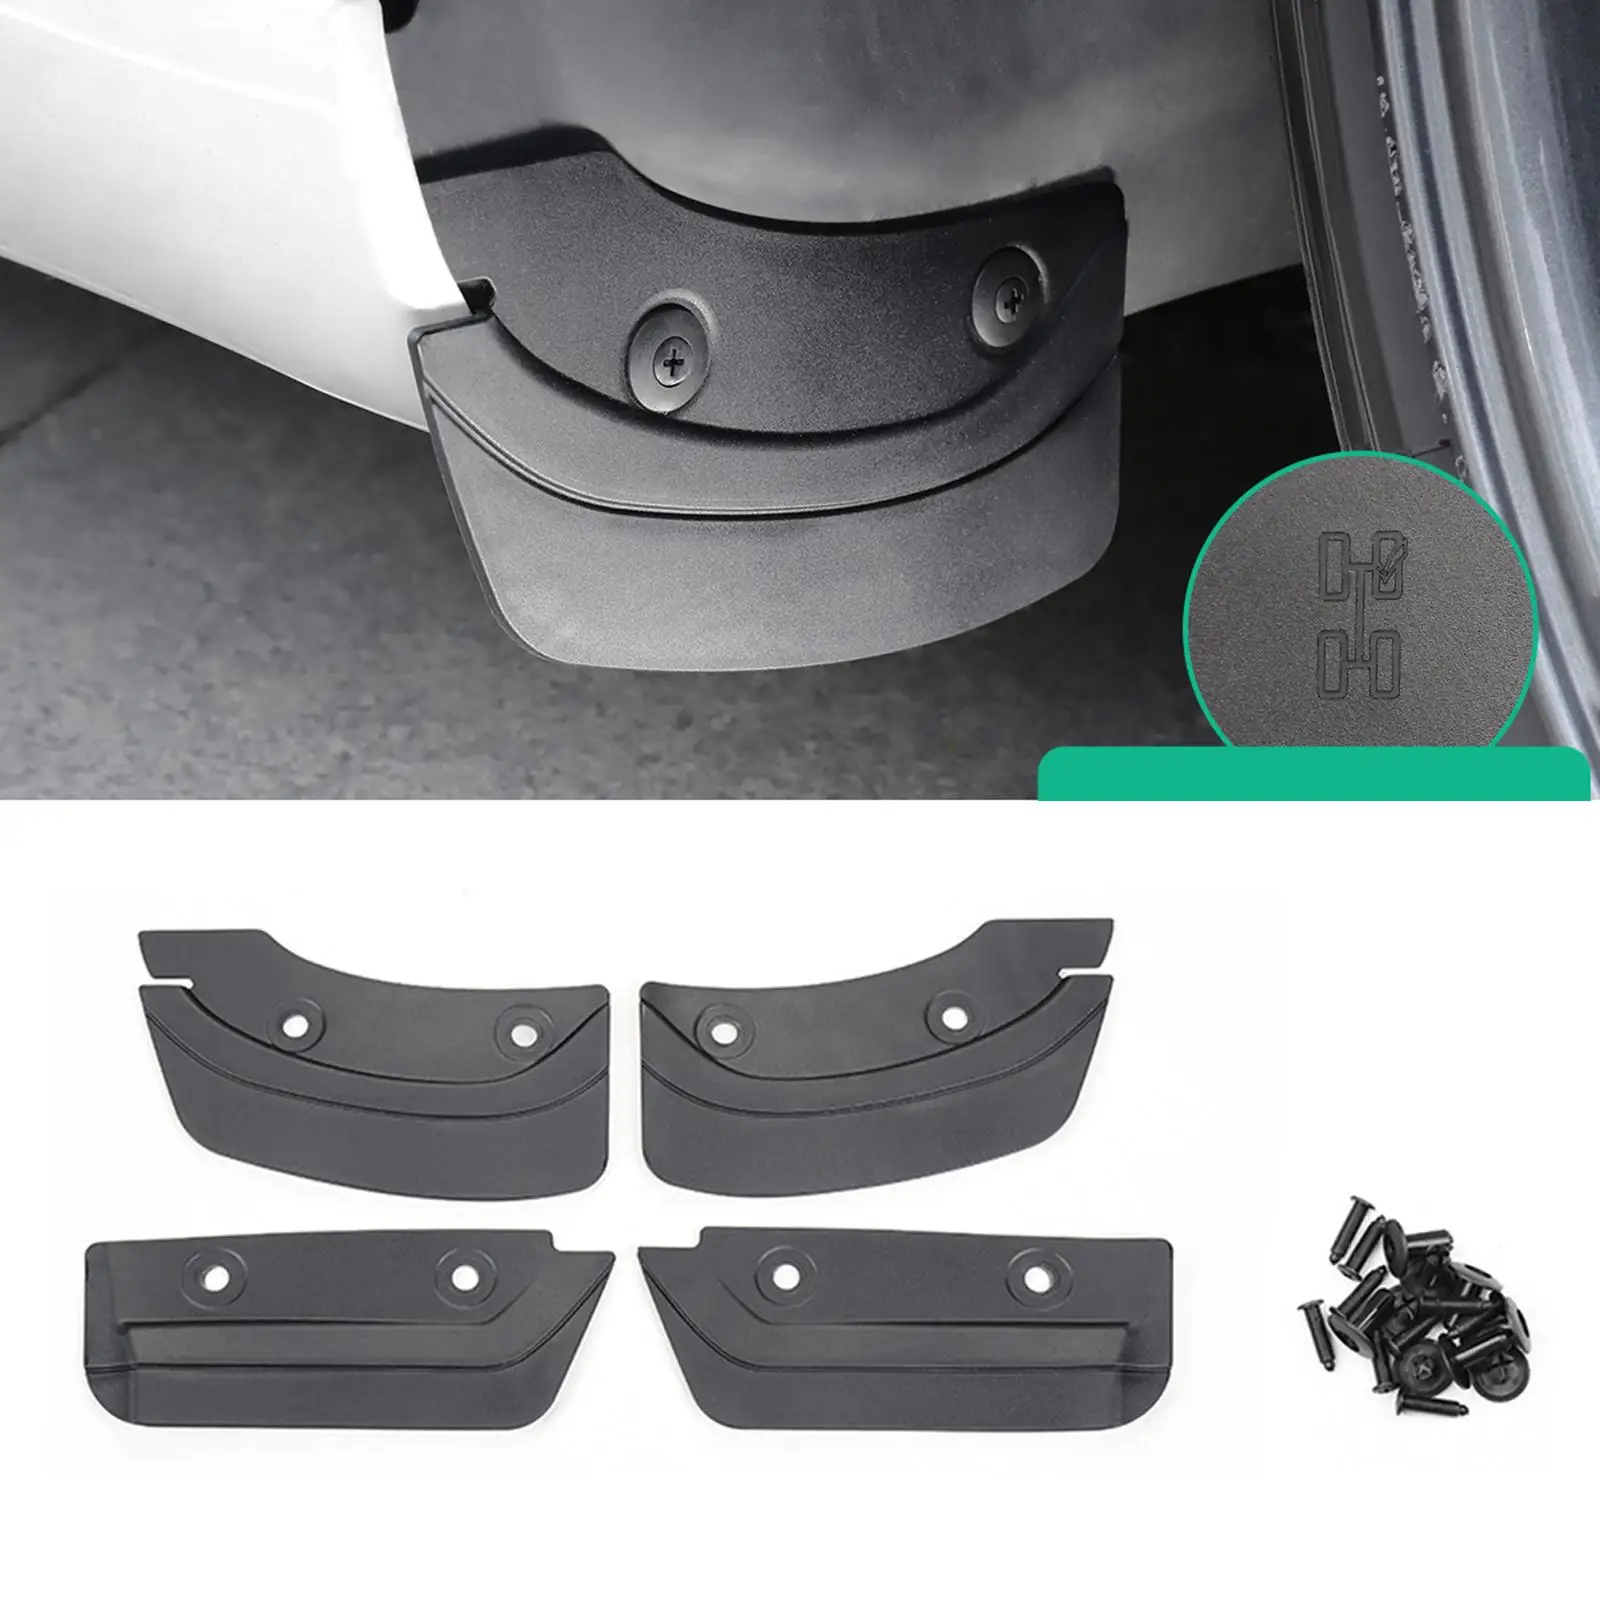 Car Mud Flaps Sediment Protection Replacement Tire Protector Mudguard Mudflaps for Tesla Model 3 Easy Installation